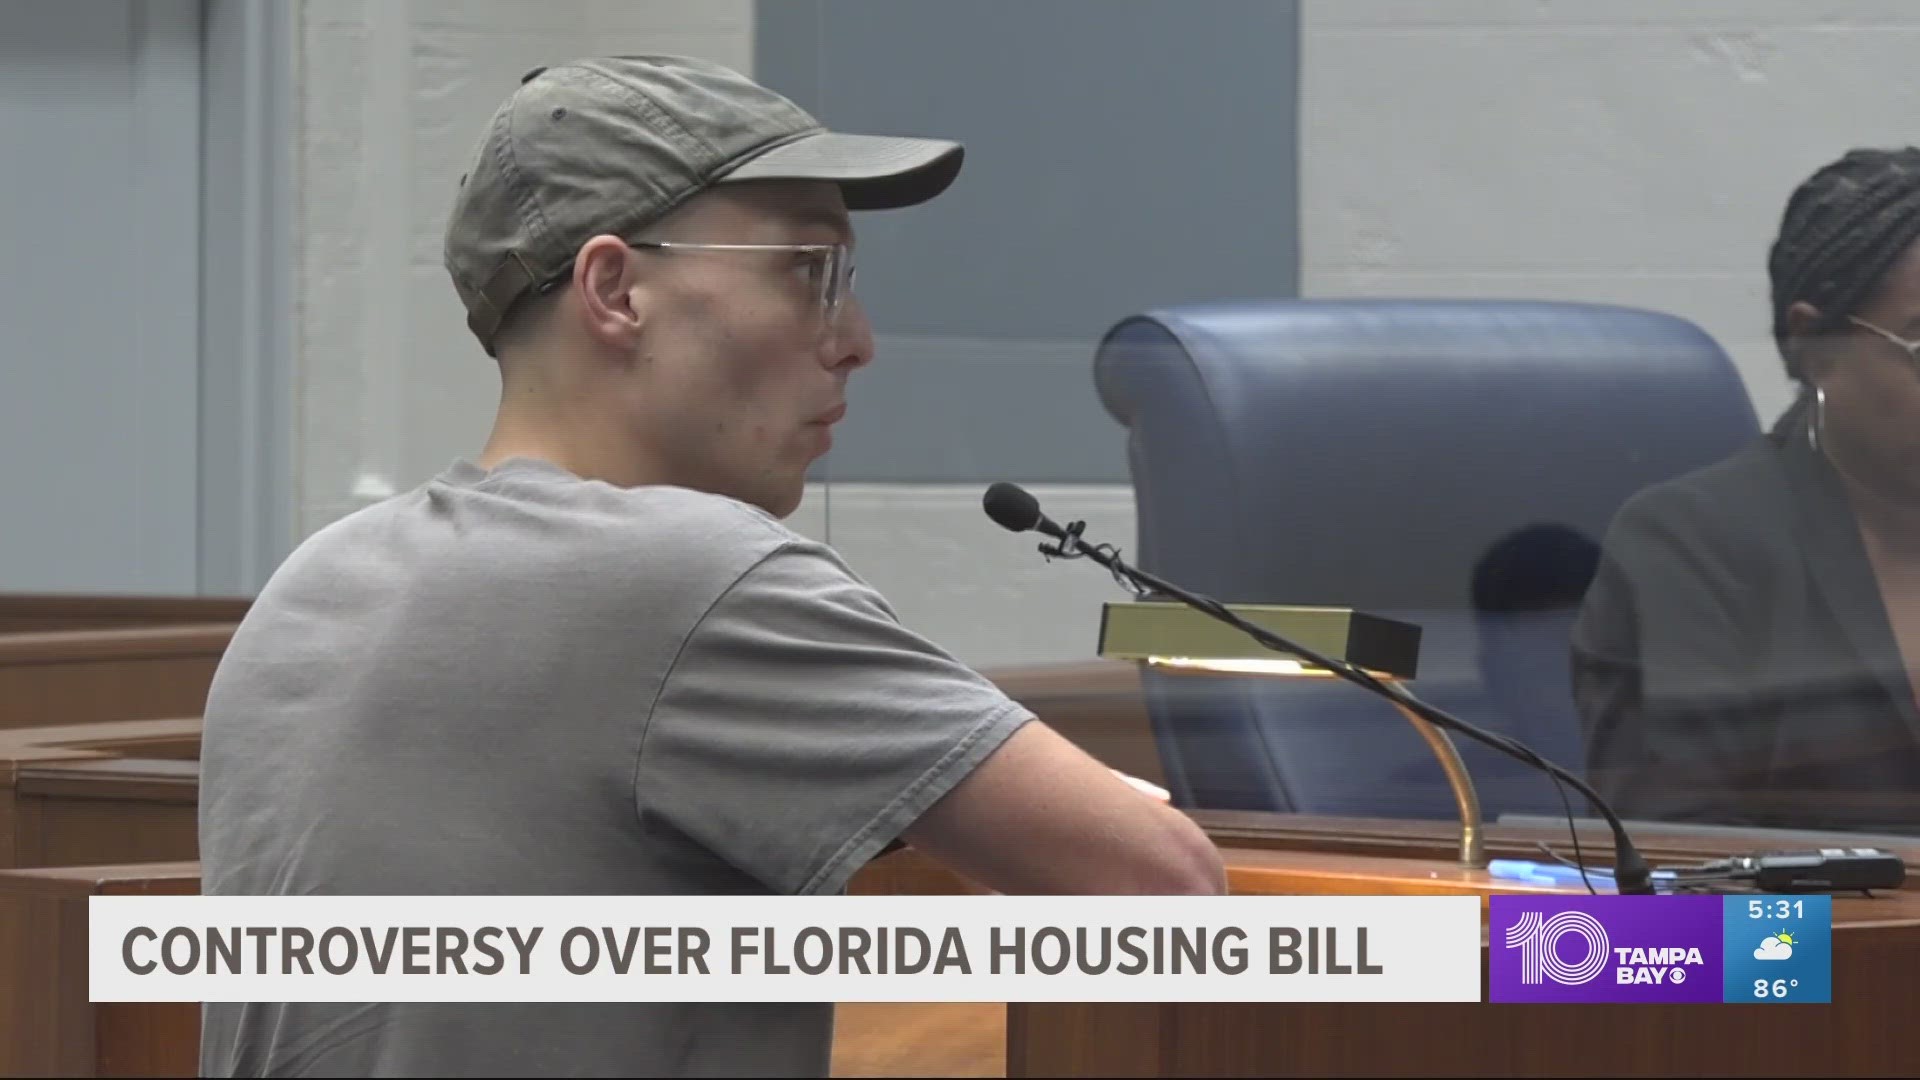 The bill passed the House on Wednesday. Critics said the bill favors landlords more than tenants.